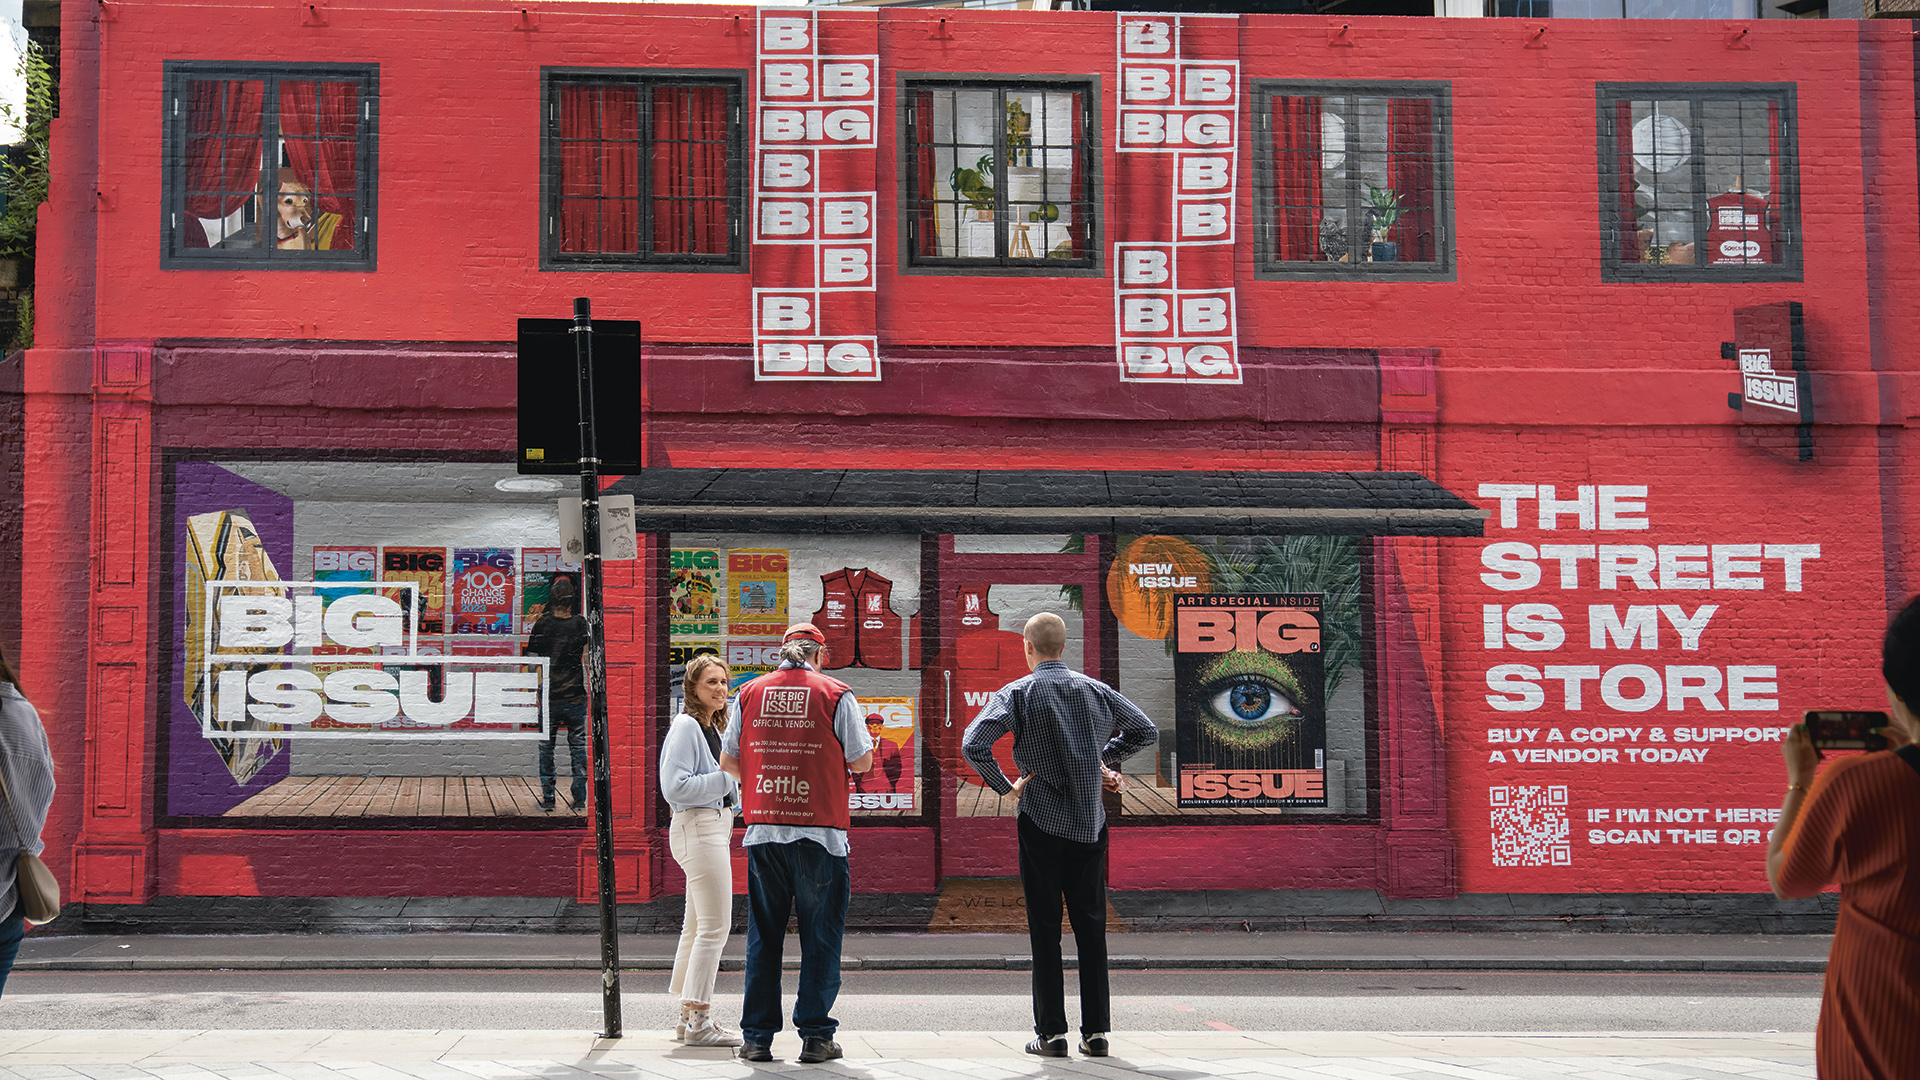 The Big Issue mural